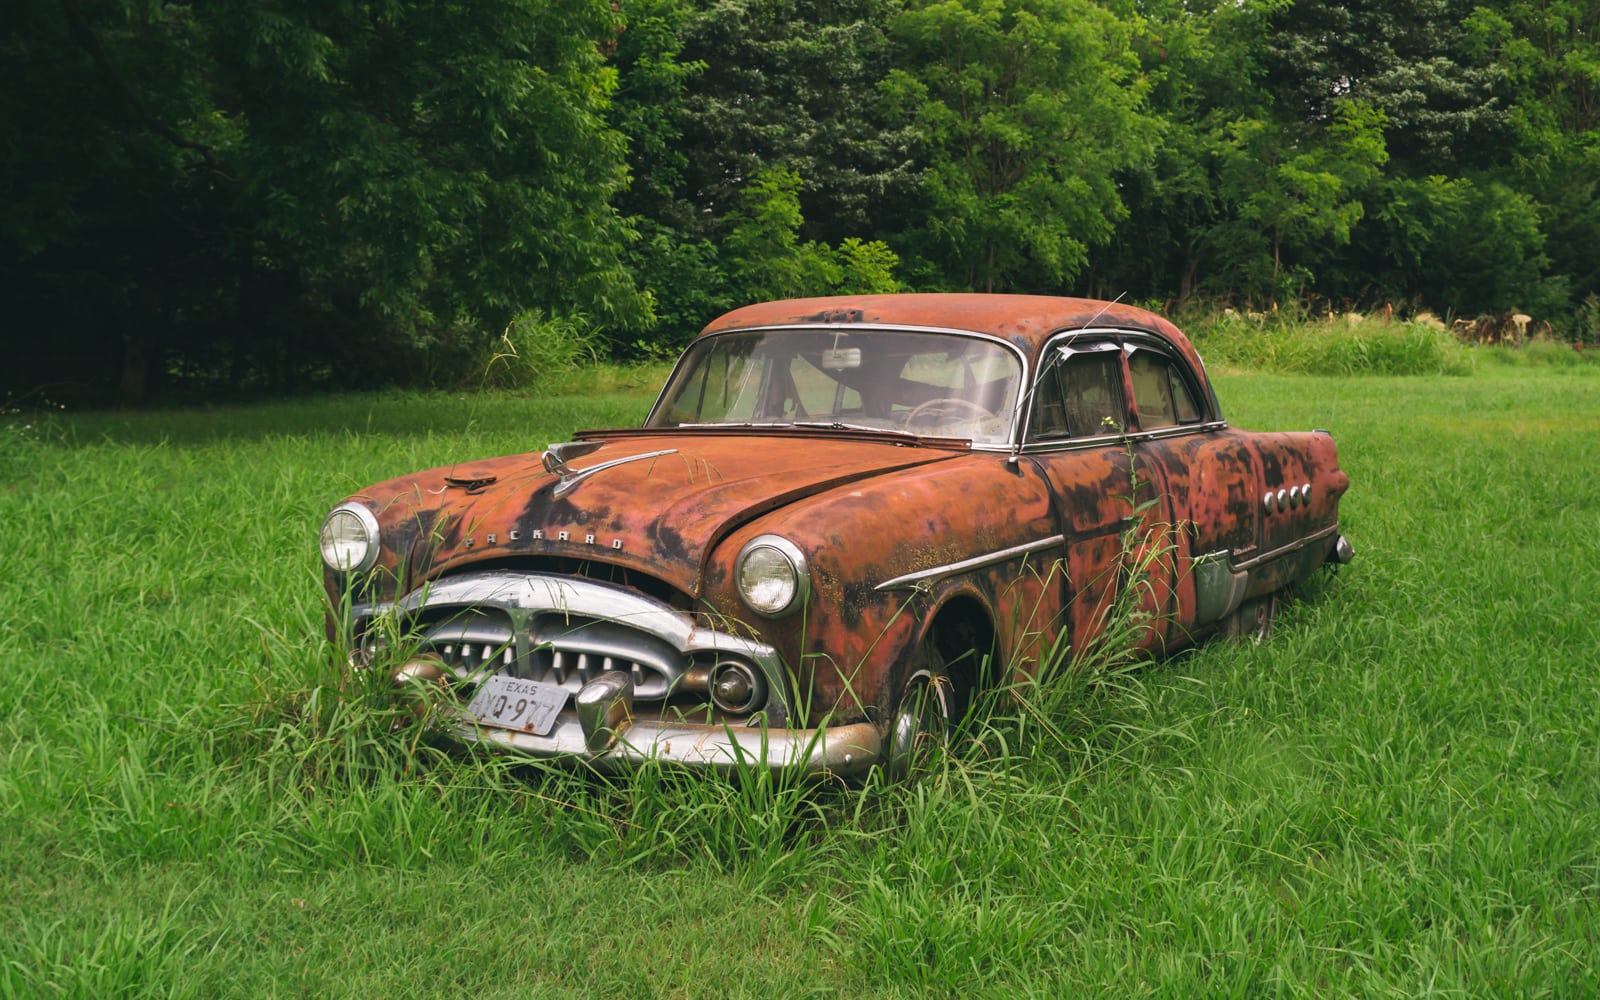 1952 Packard Patrician 400 Abandoned And Deteriorated In A Texas Field